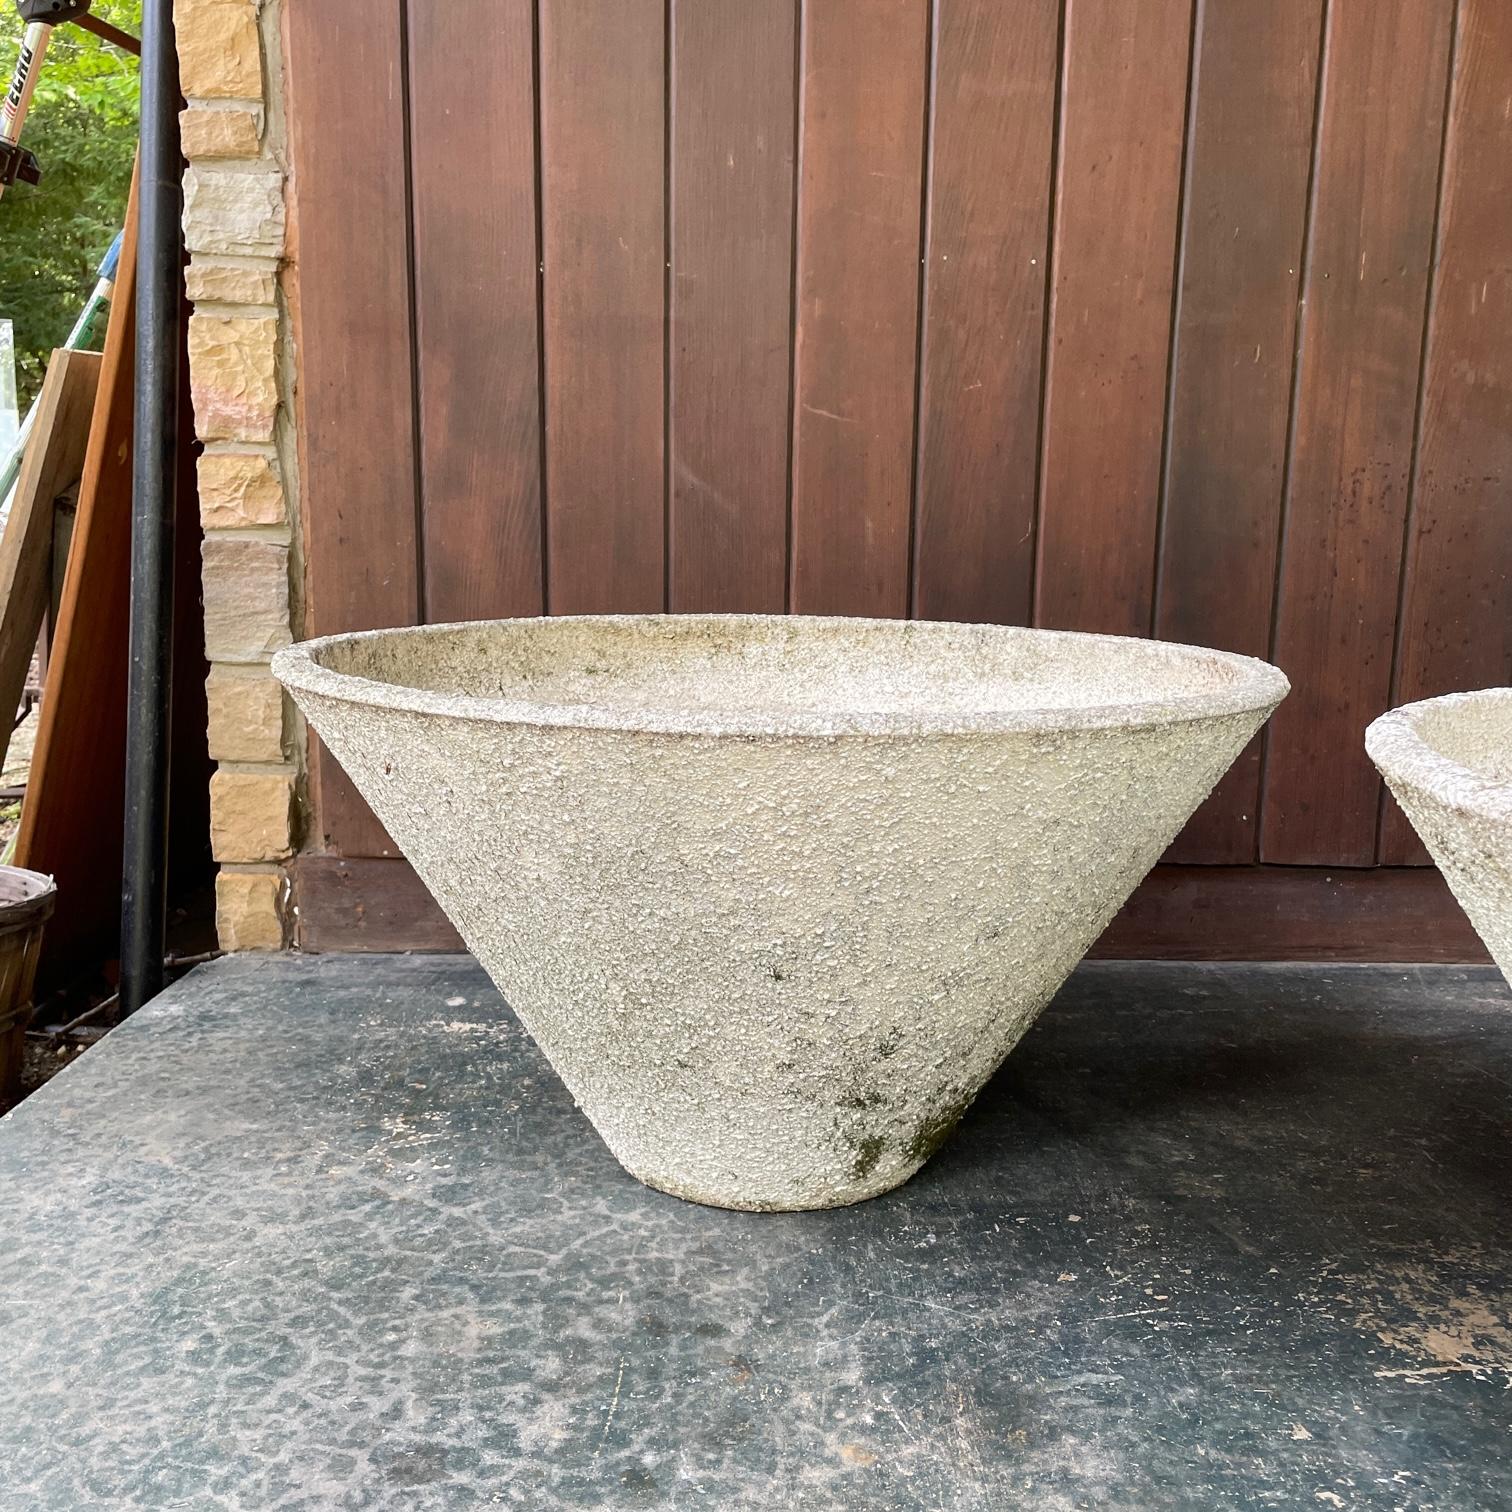 1960s Massive Coned Planters Pair by Willy Guhl for Eternit, California Style For Sale 3